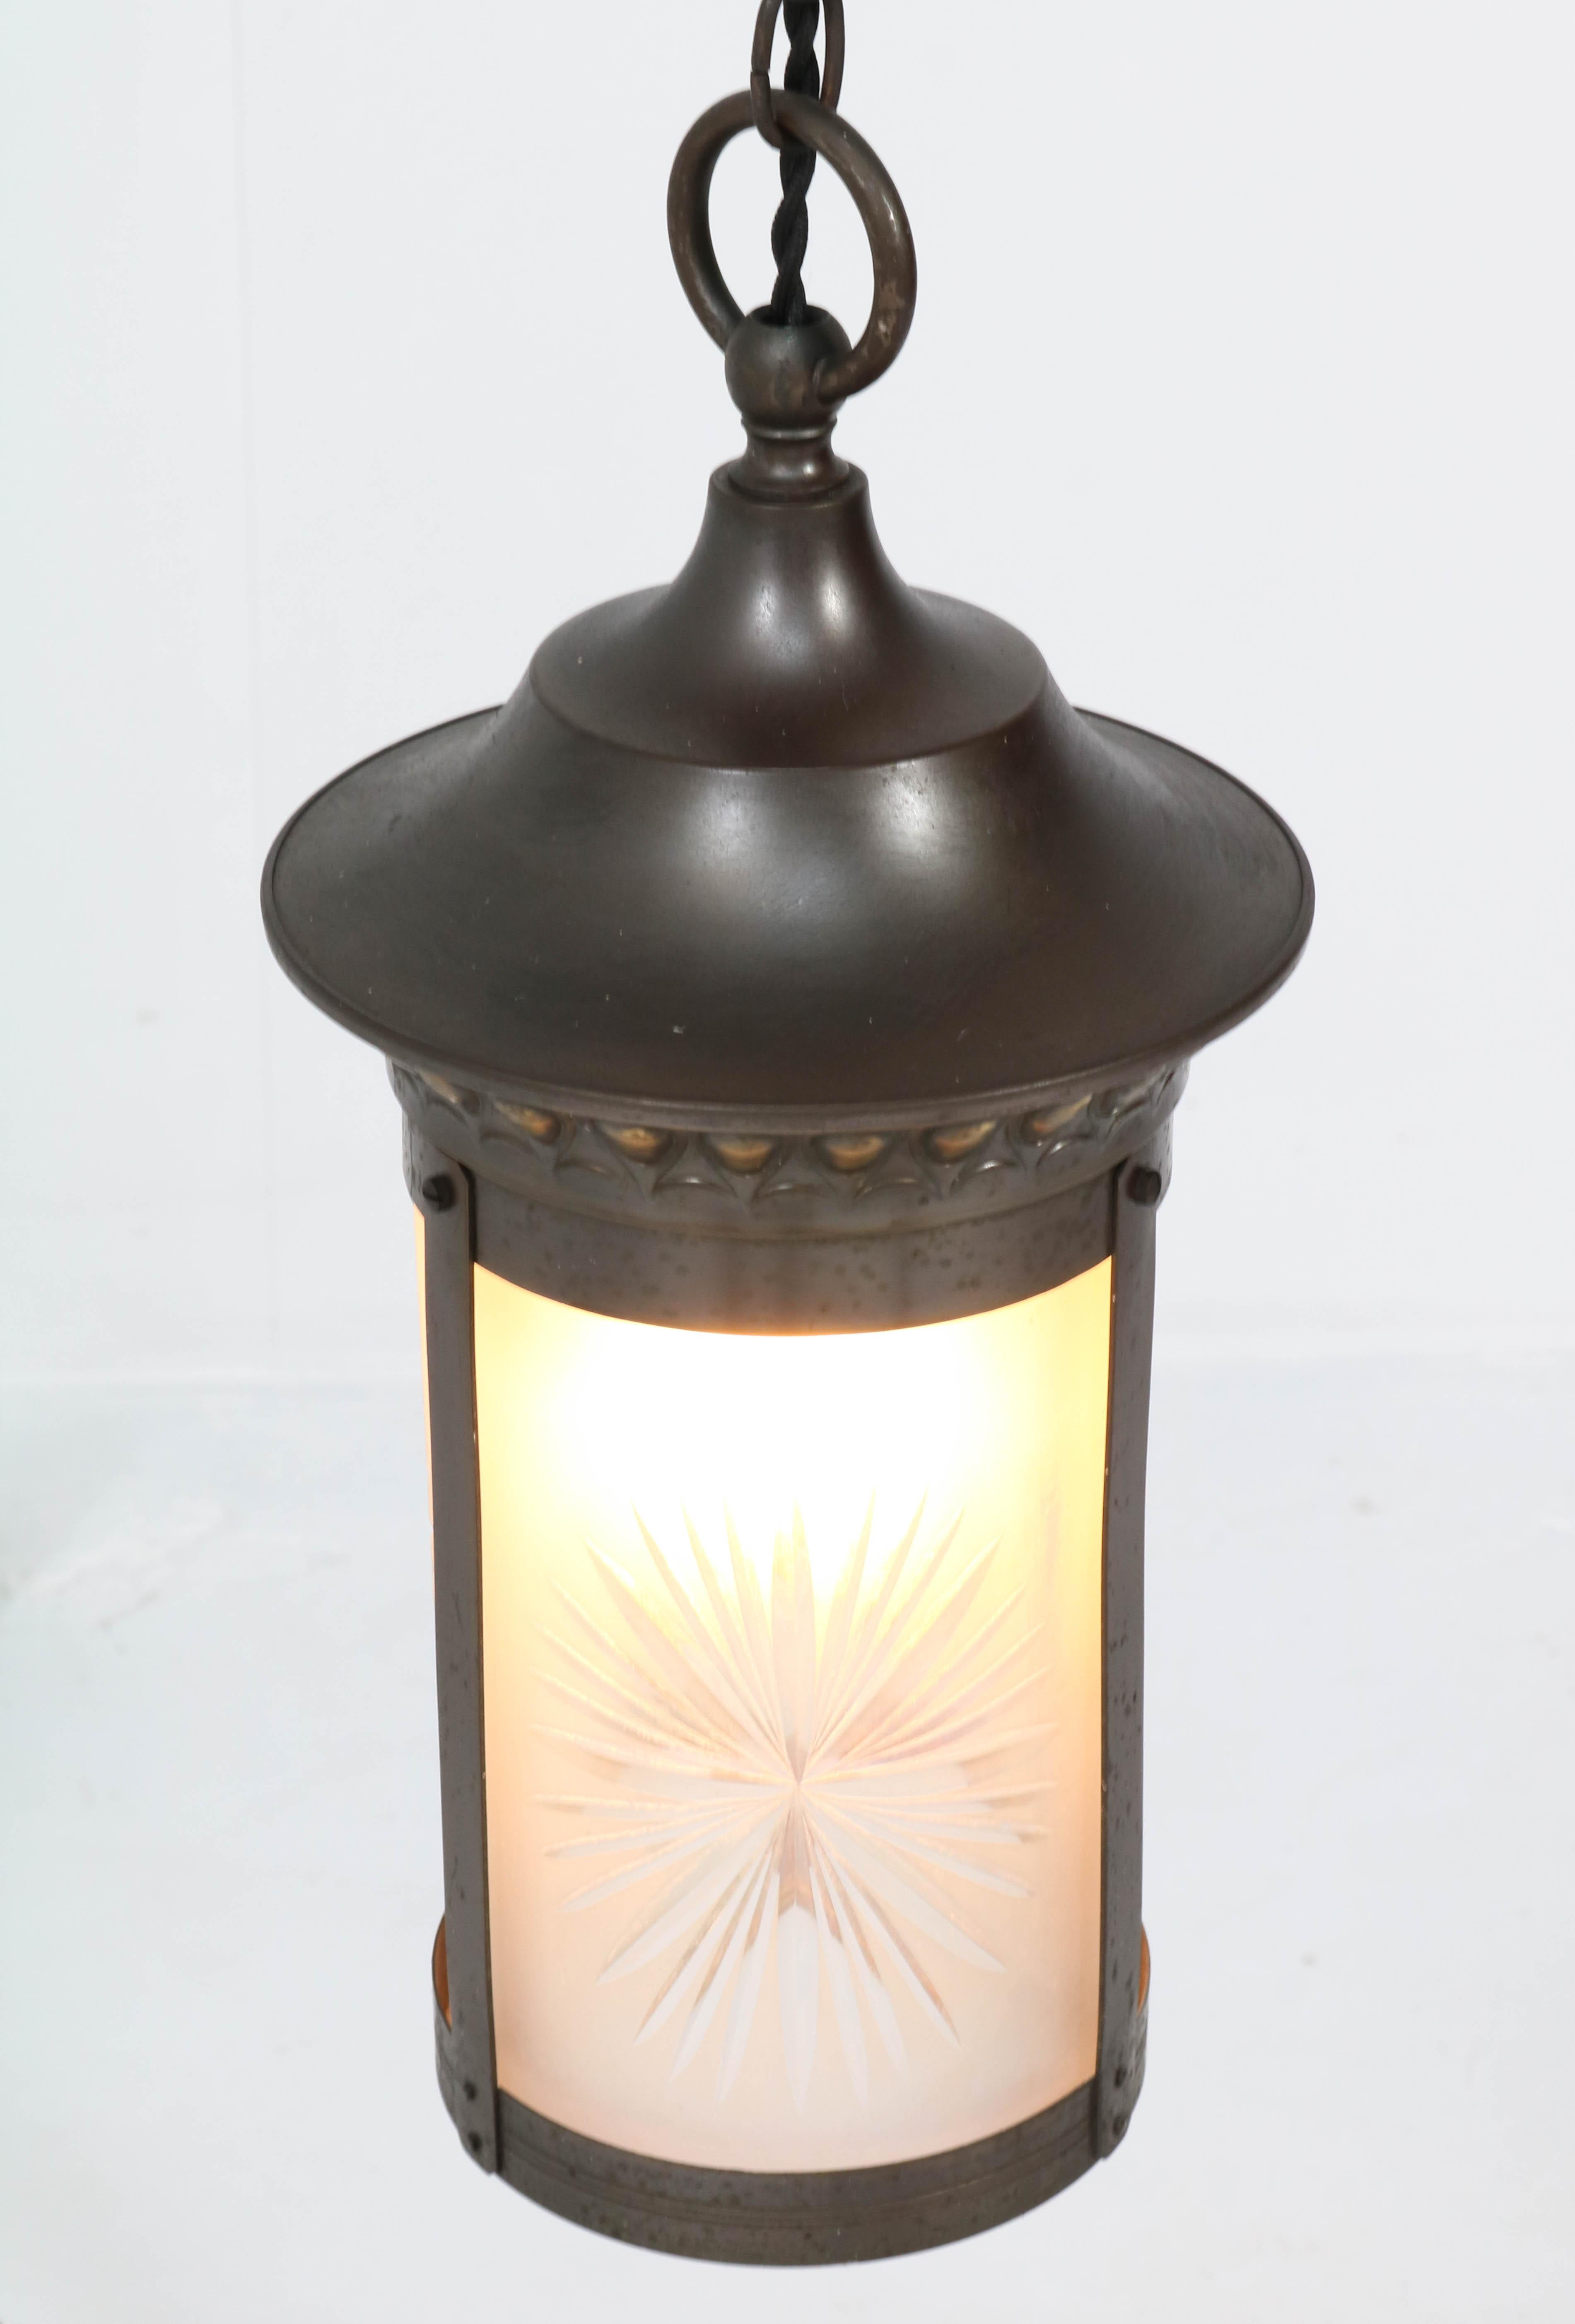 Patinated Brass Art Nouveau Lantern with Etched Glass, 1900s For Sale 5